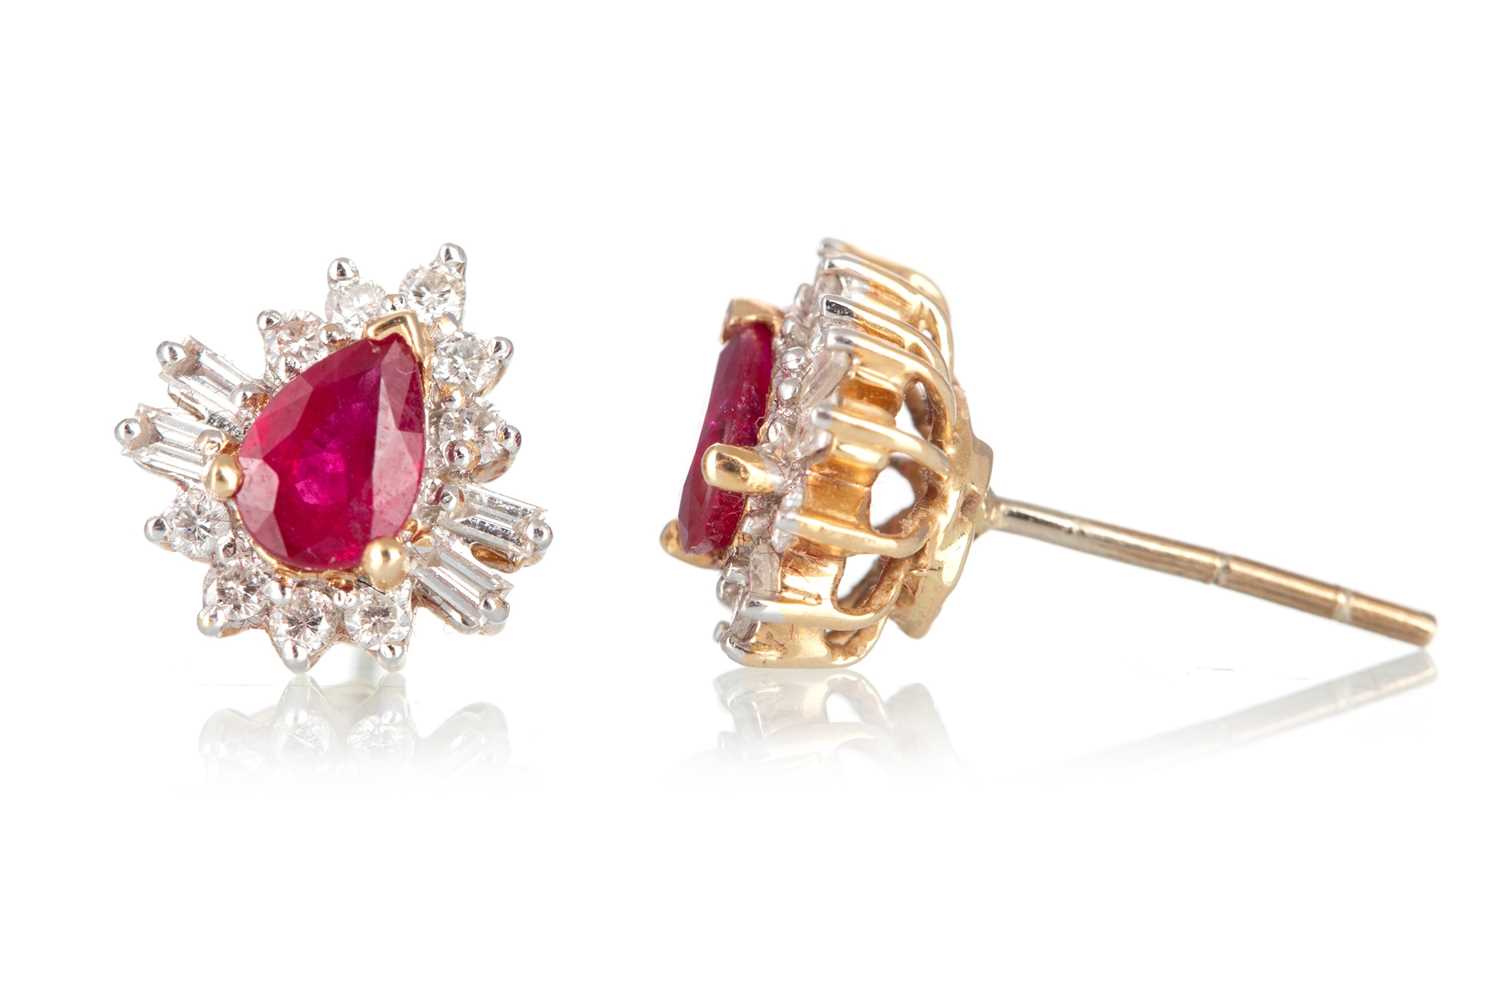 Lot 781 - PAIR OF RUBY AND DIAMOND EARRINGS